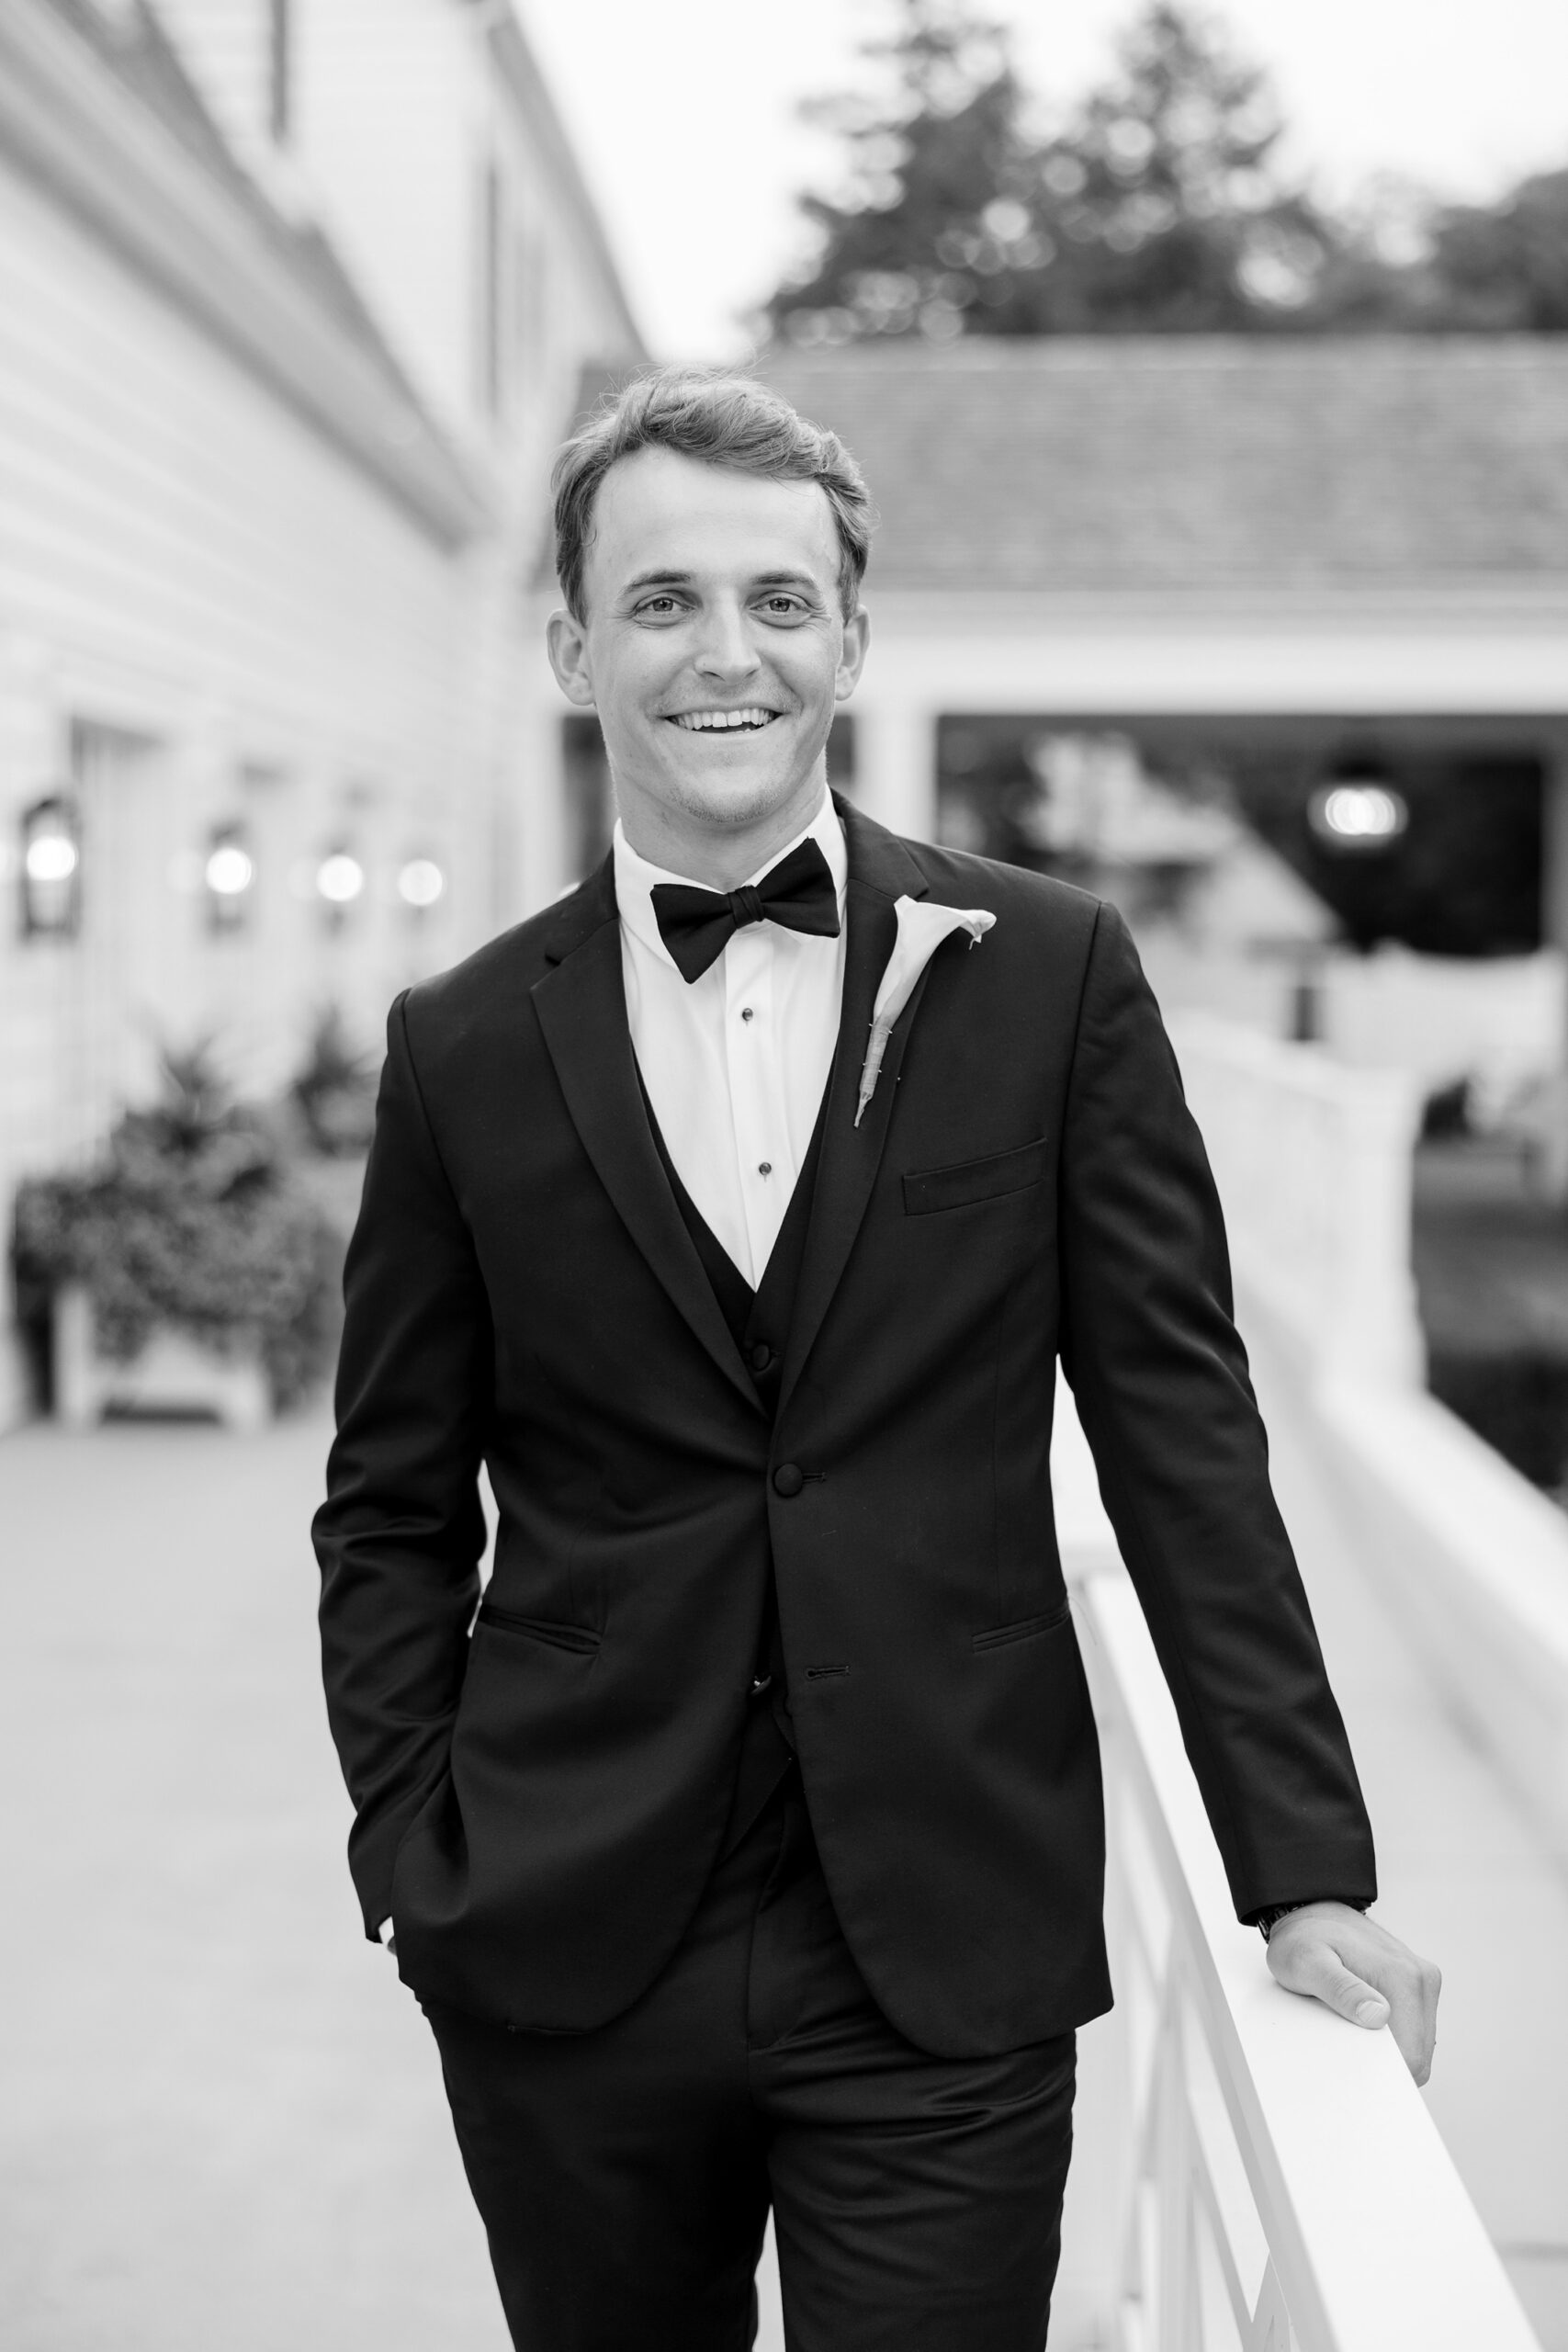 The groom smiled at the camera before the Westmoreland Country Club wedding reception